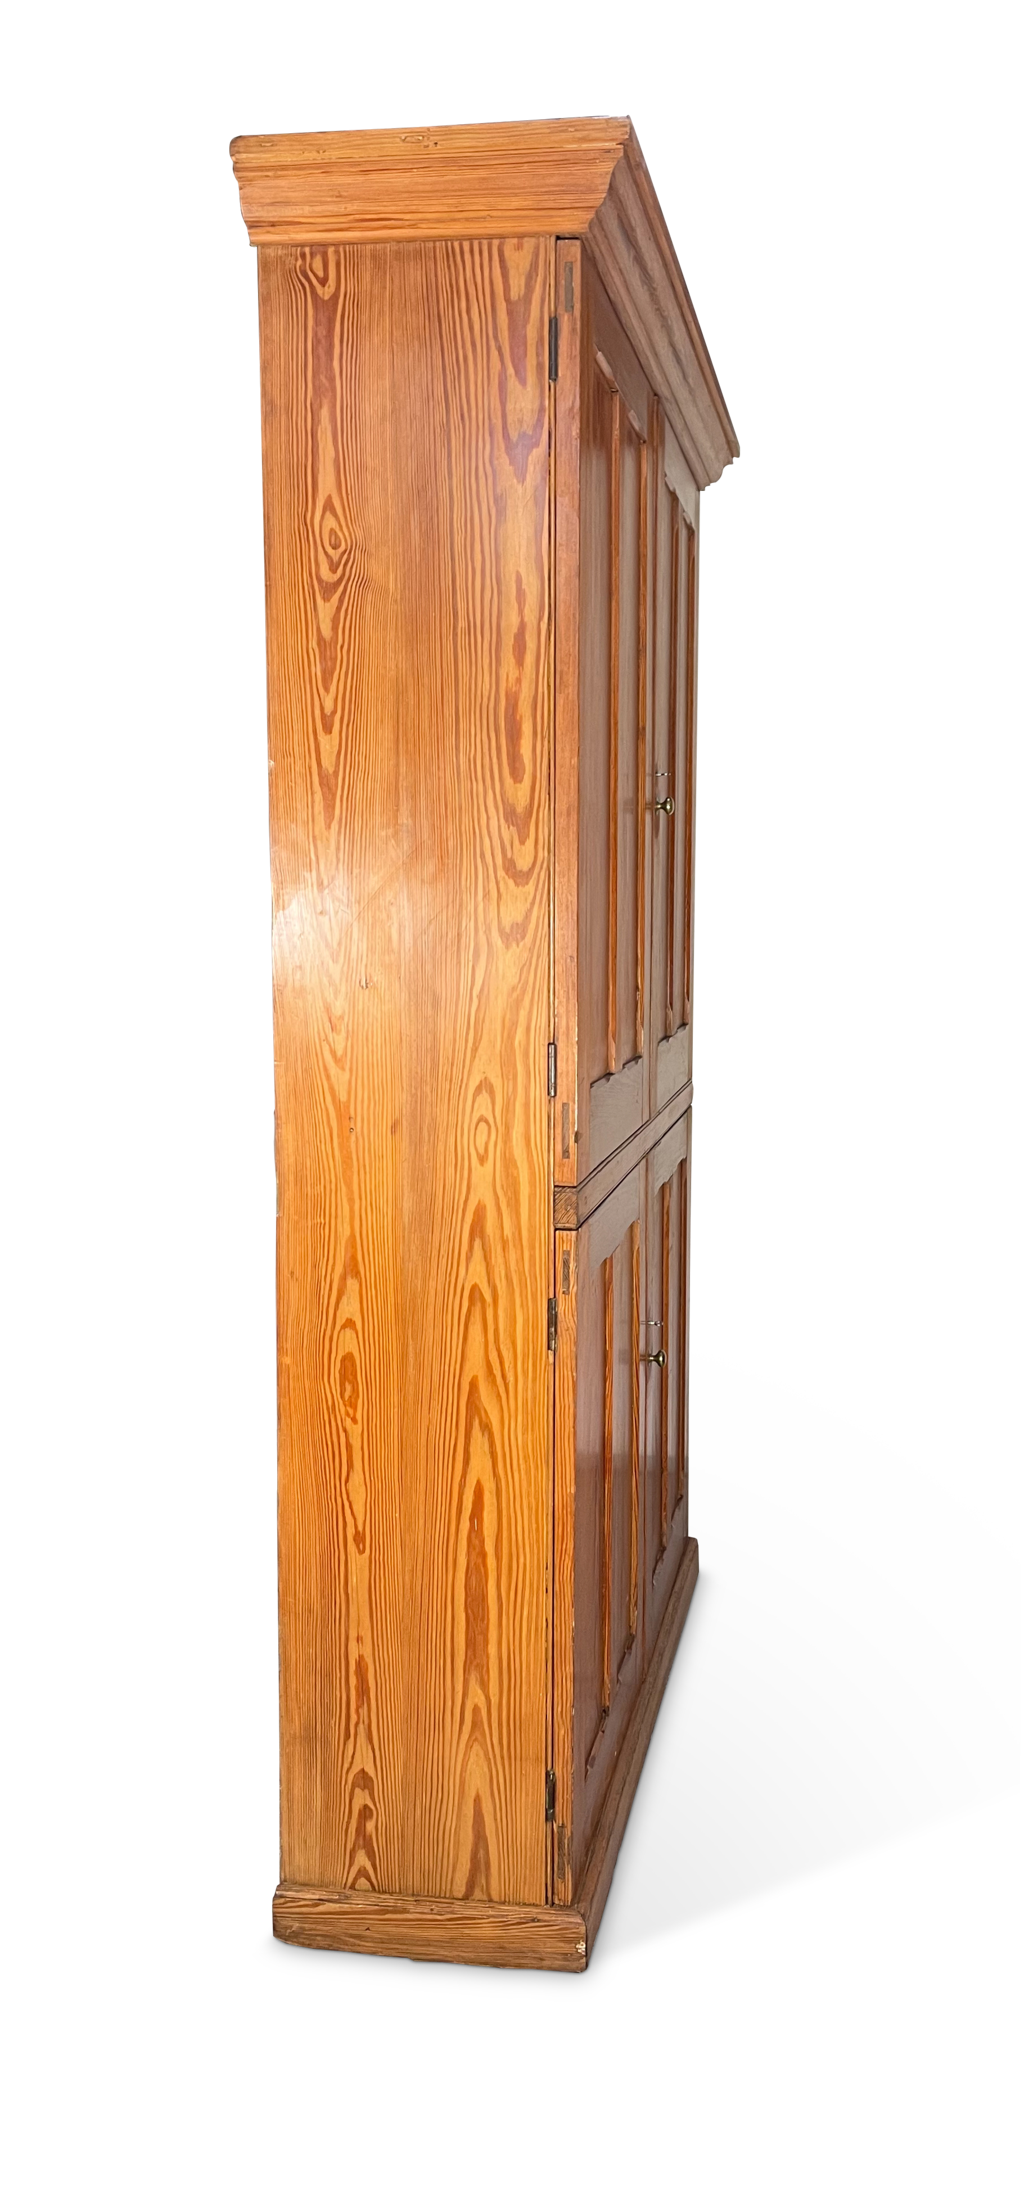 Pitch Pine Four Doored Chapel Cupboard